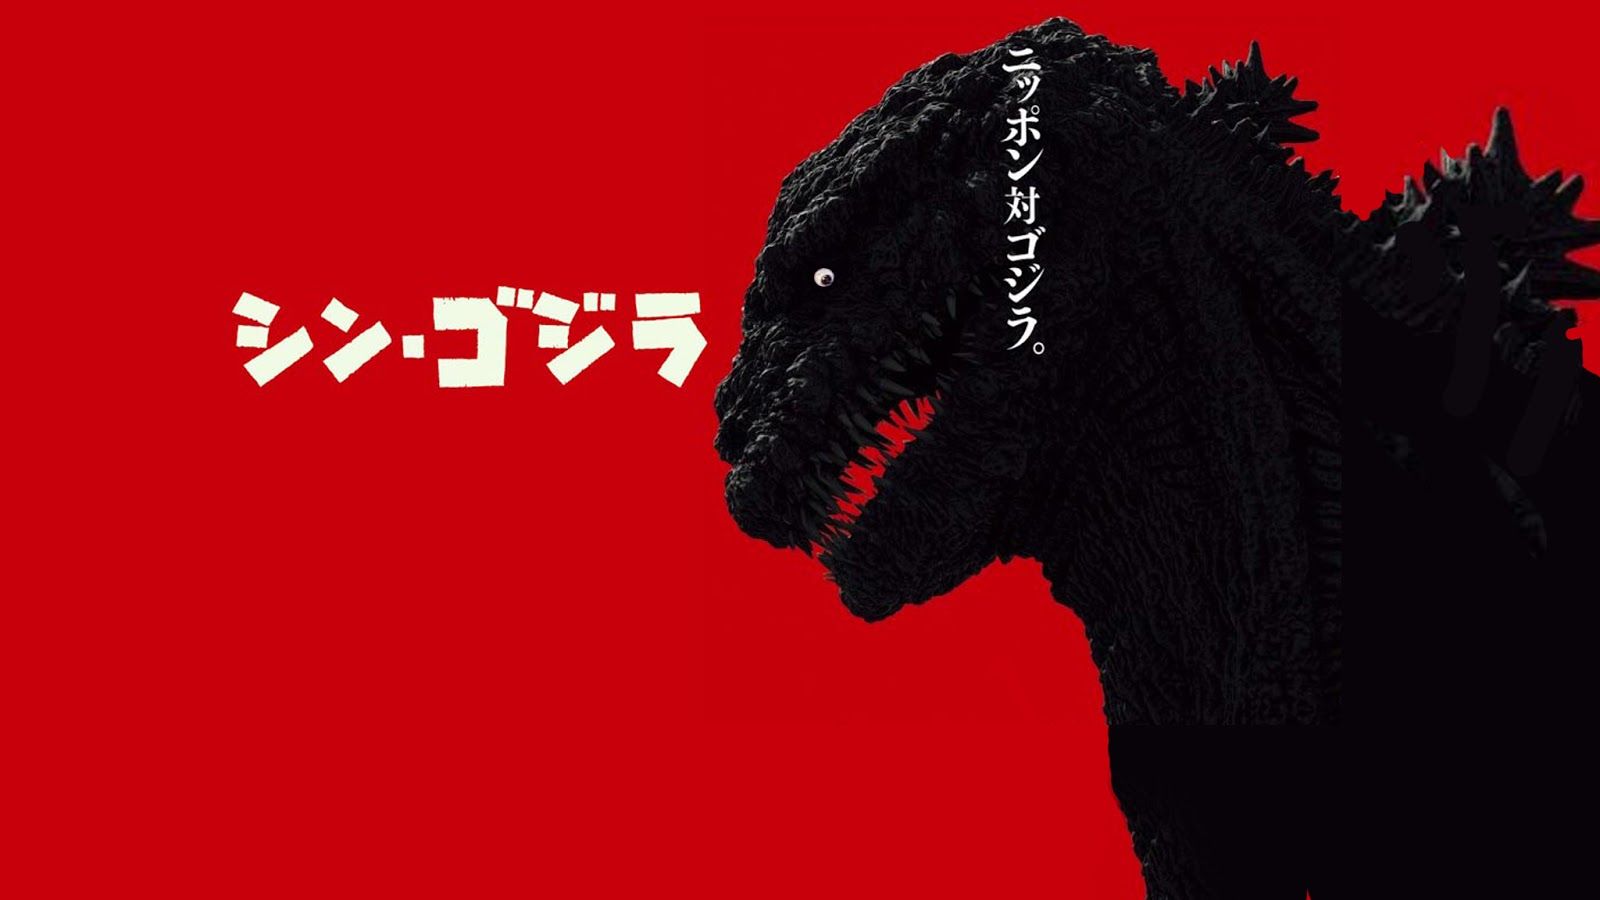 Shin Godzilla Wallpapers and Backgrounds image Free Download